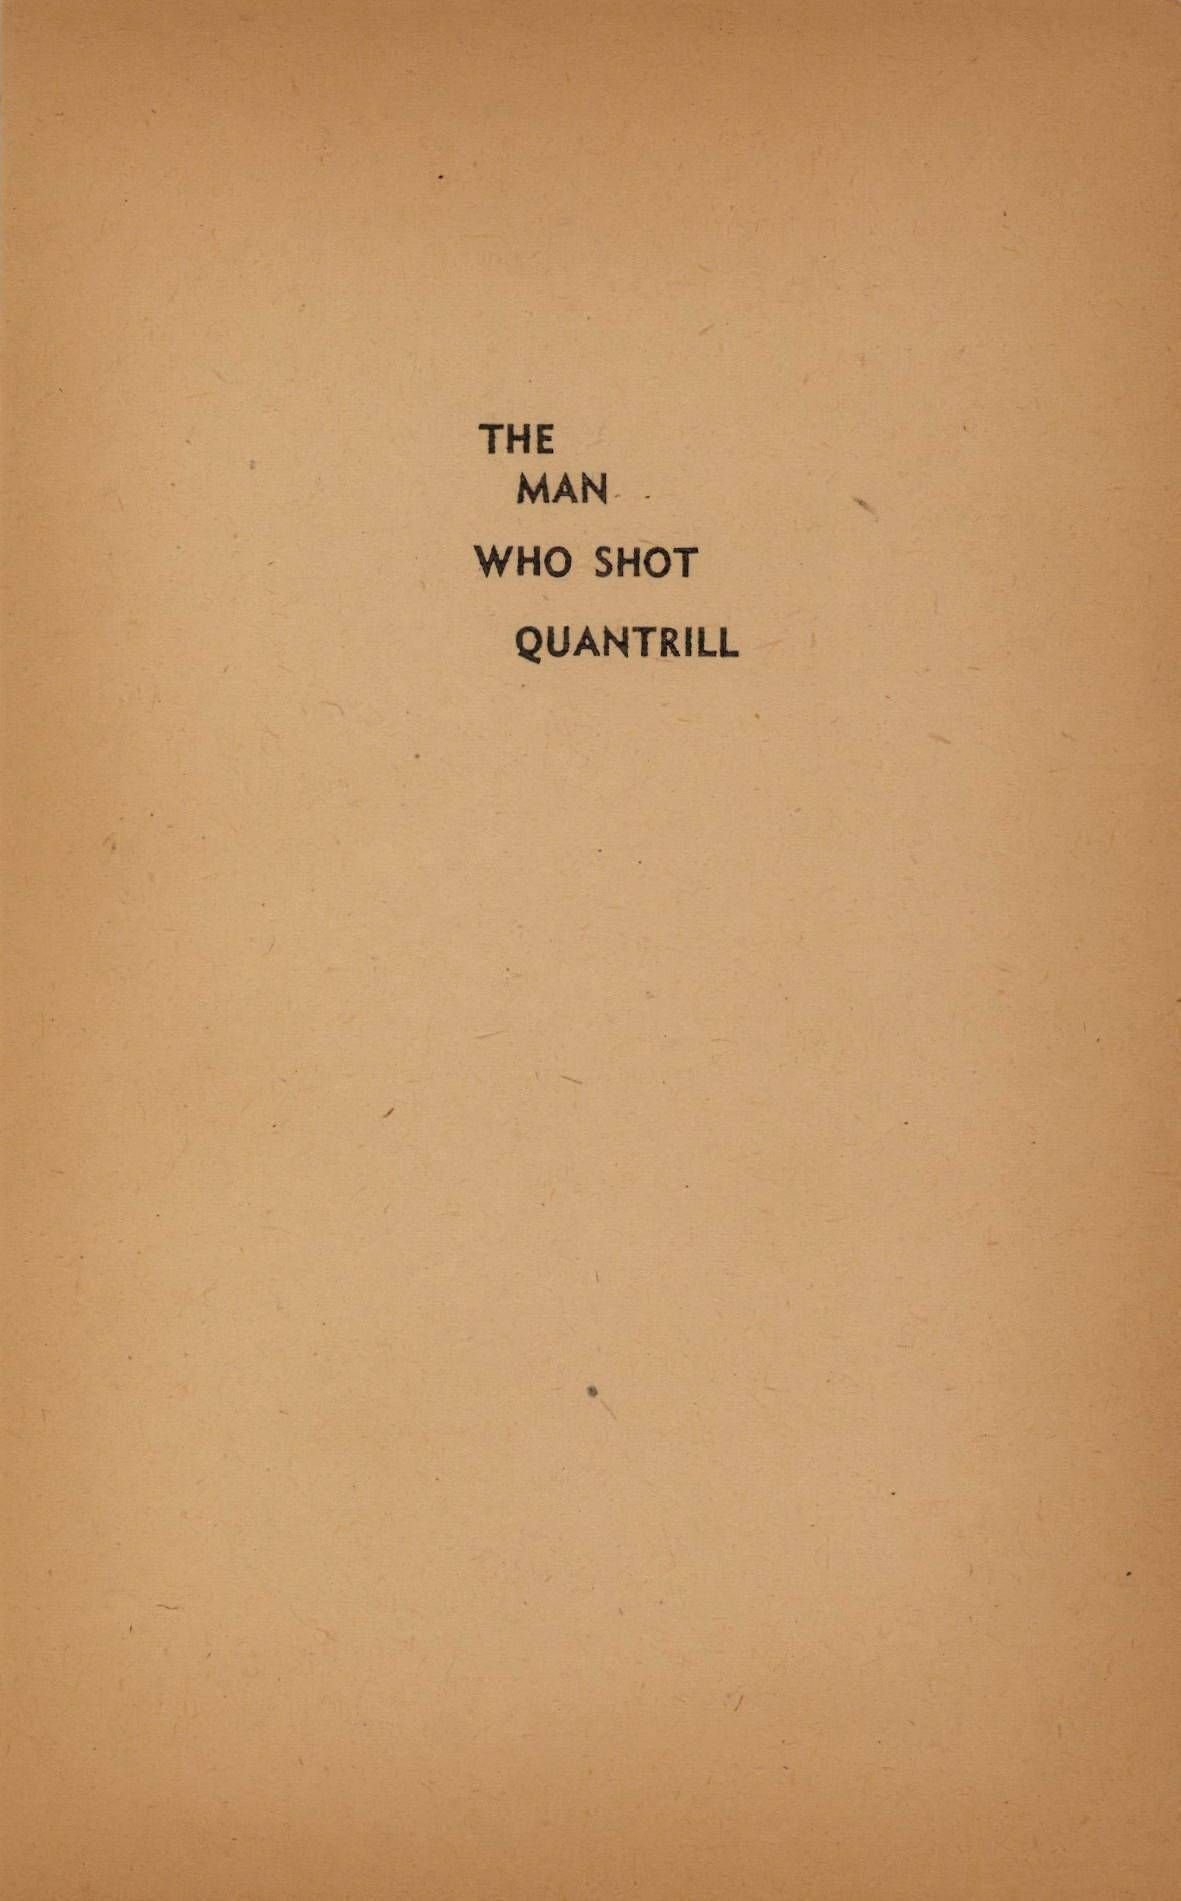 The Man Who Shot Quantrill by George C Appell page 007.jpg